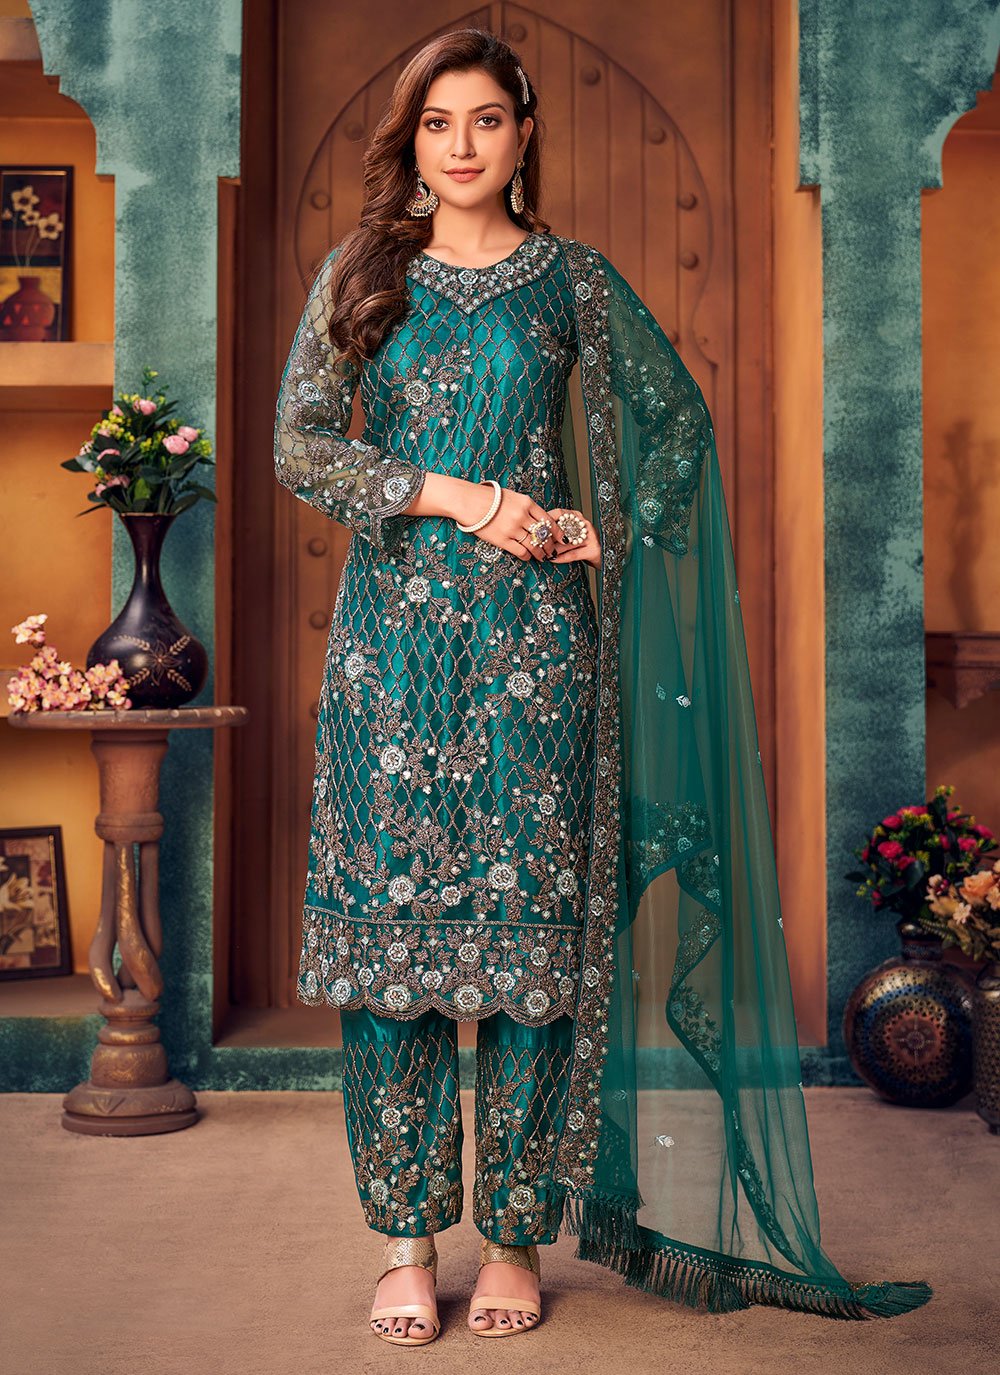 Teal Leyered Salwar Suit in Net with Embroidered